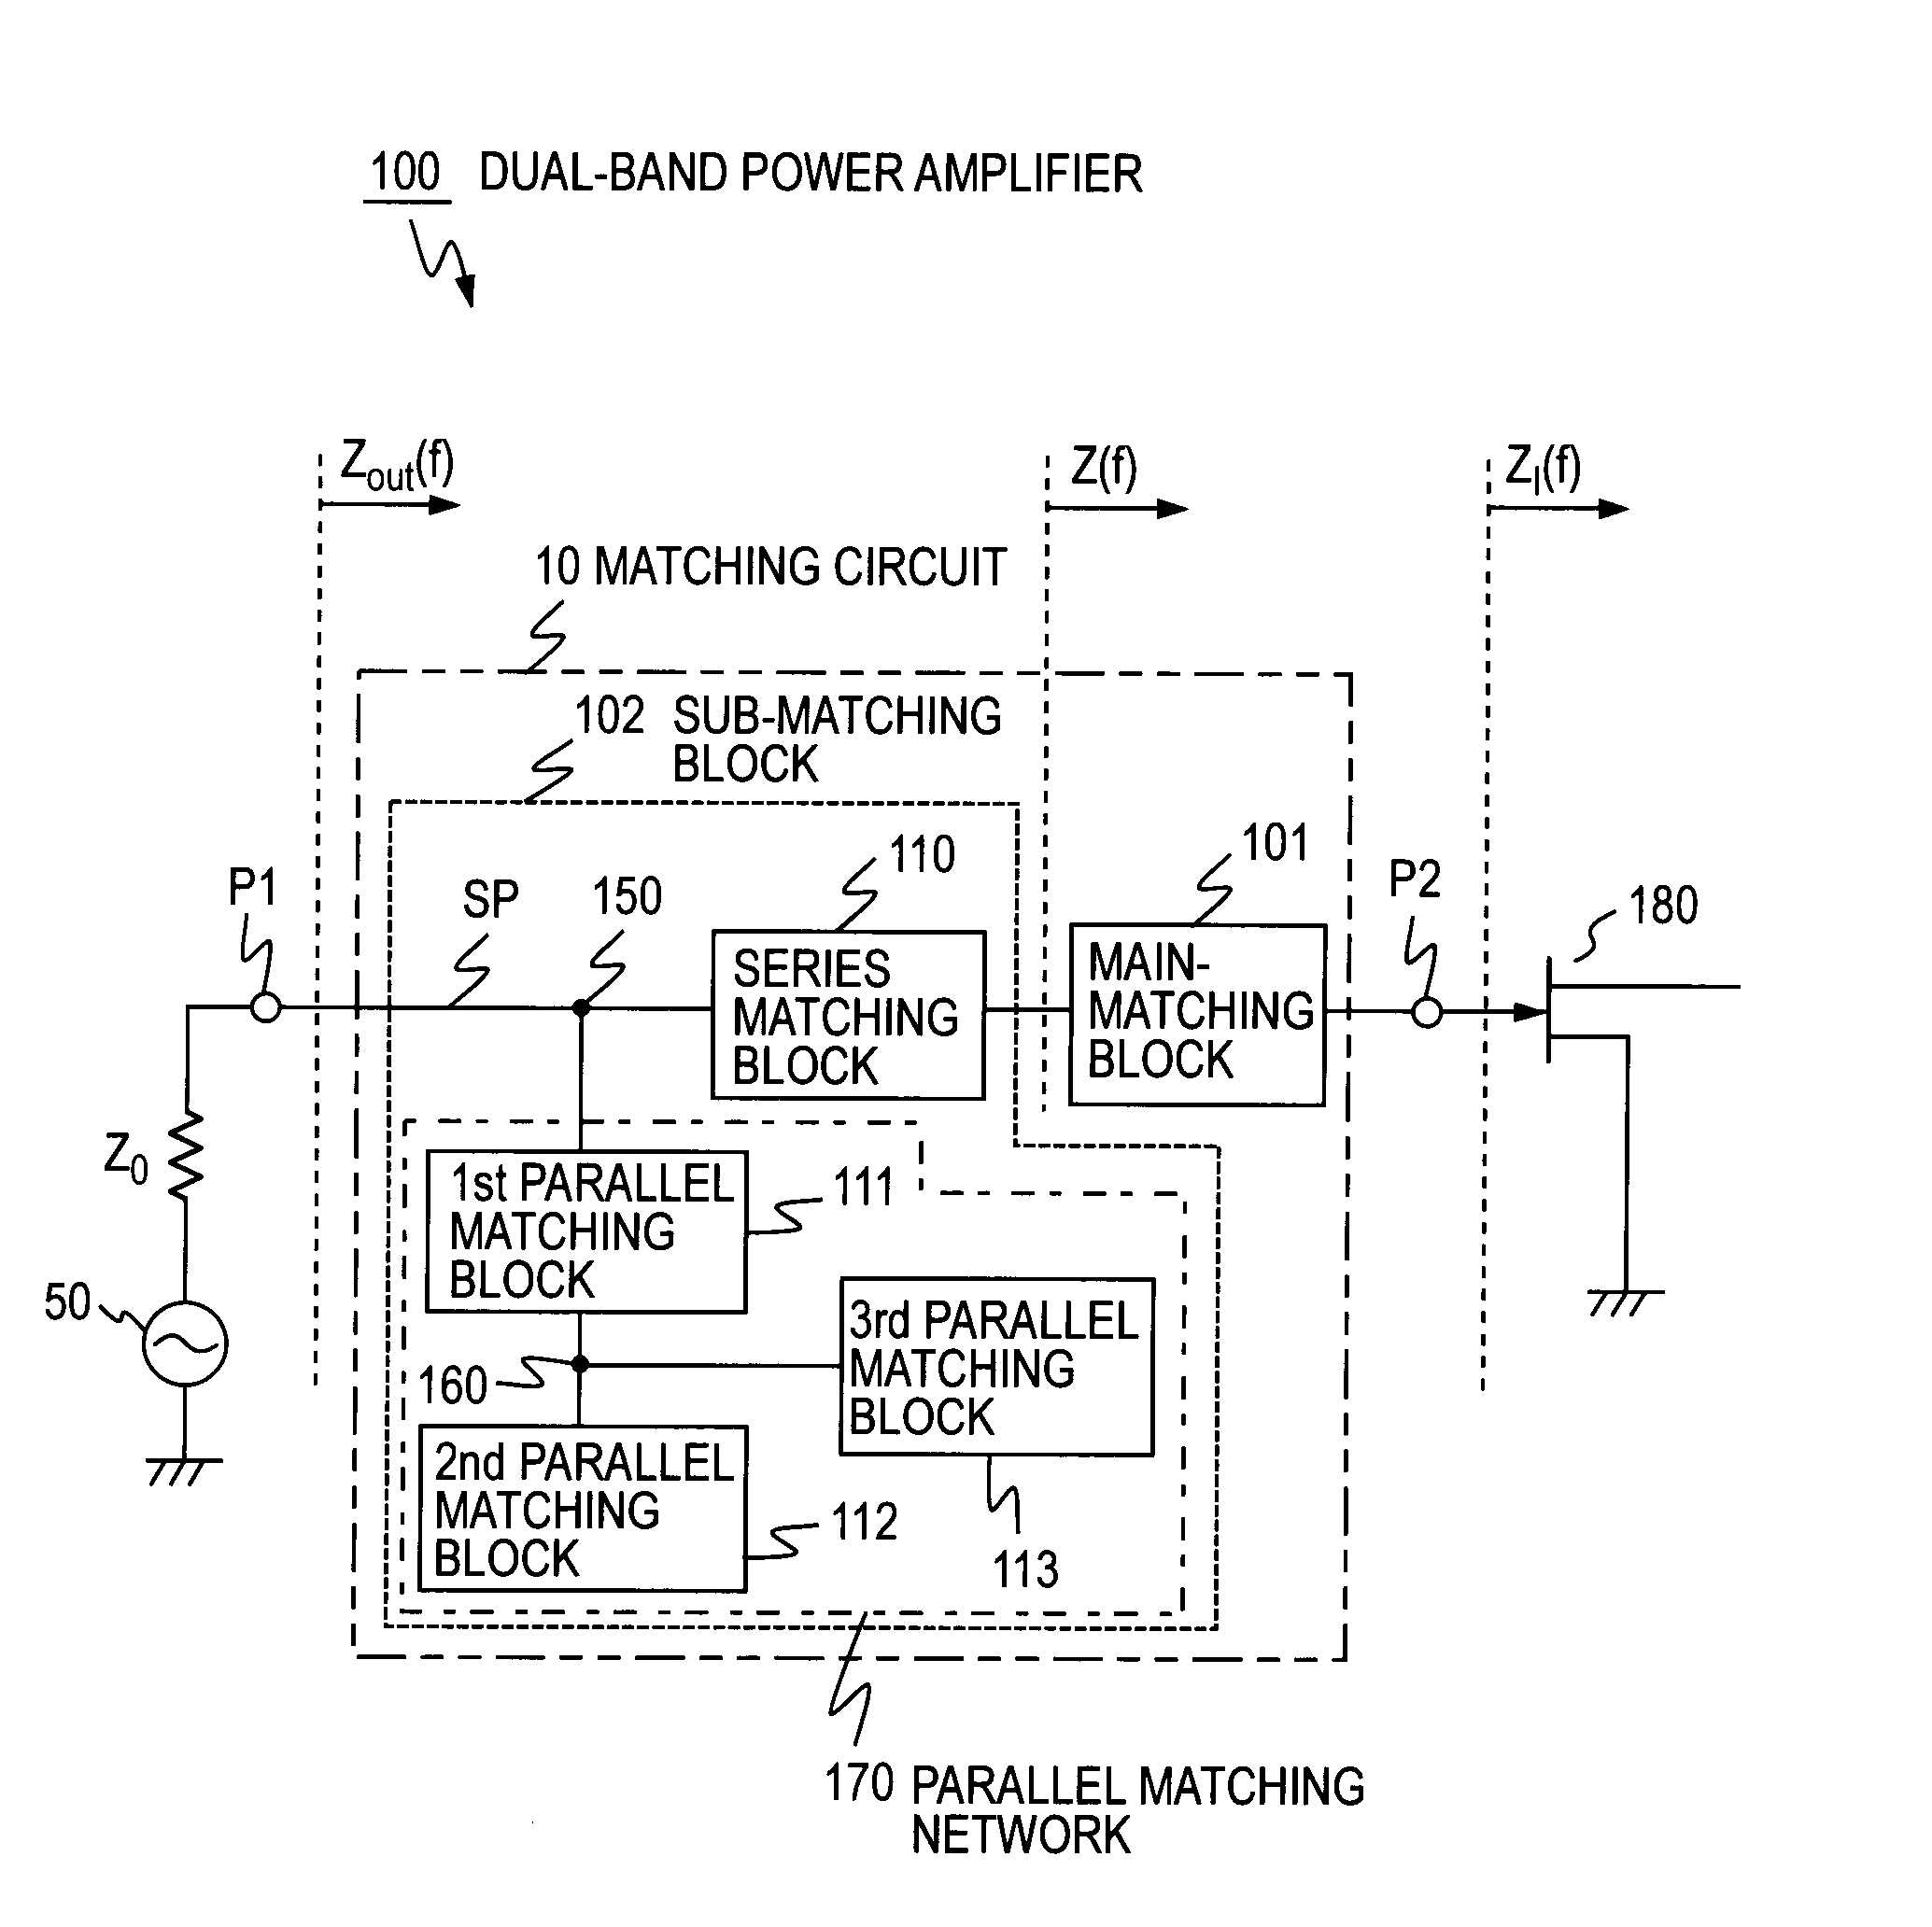 Matching circuit and dual-band power amplifier